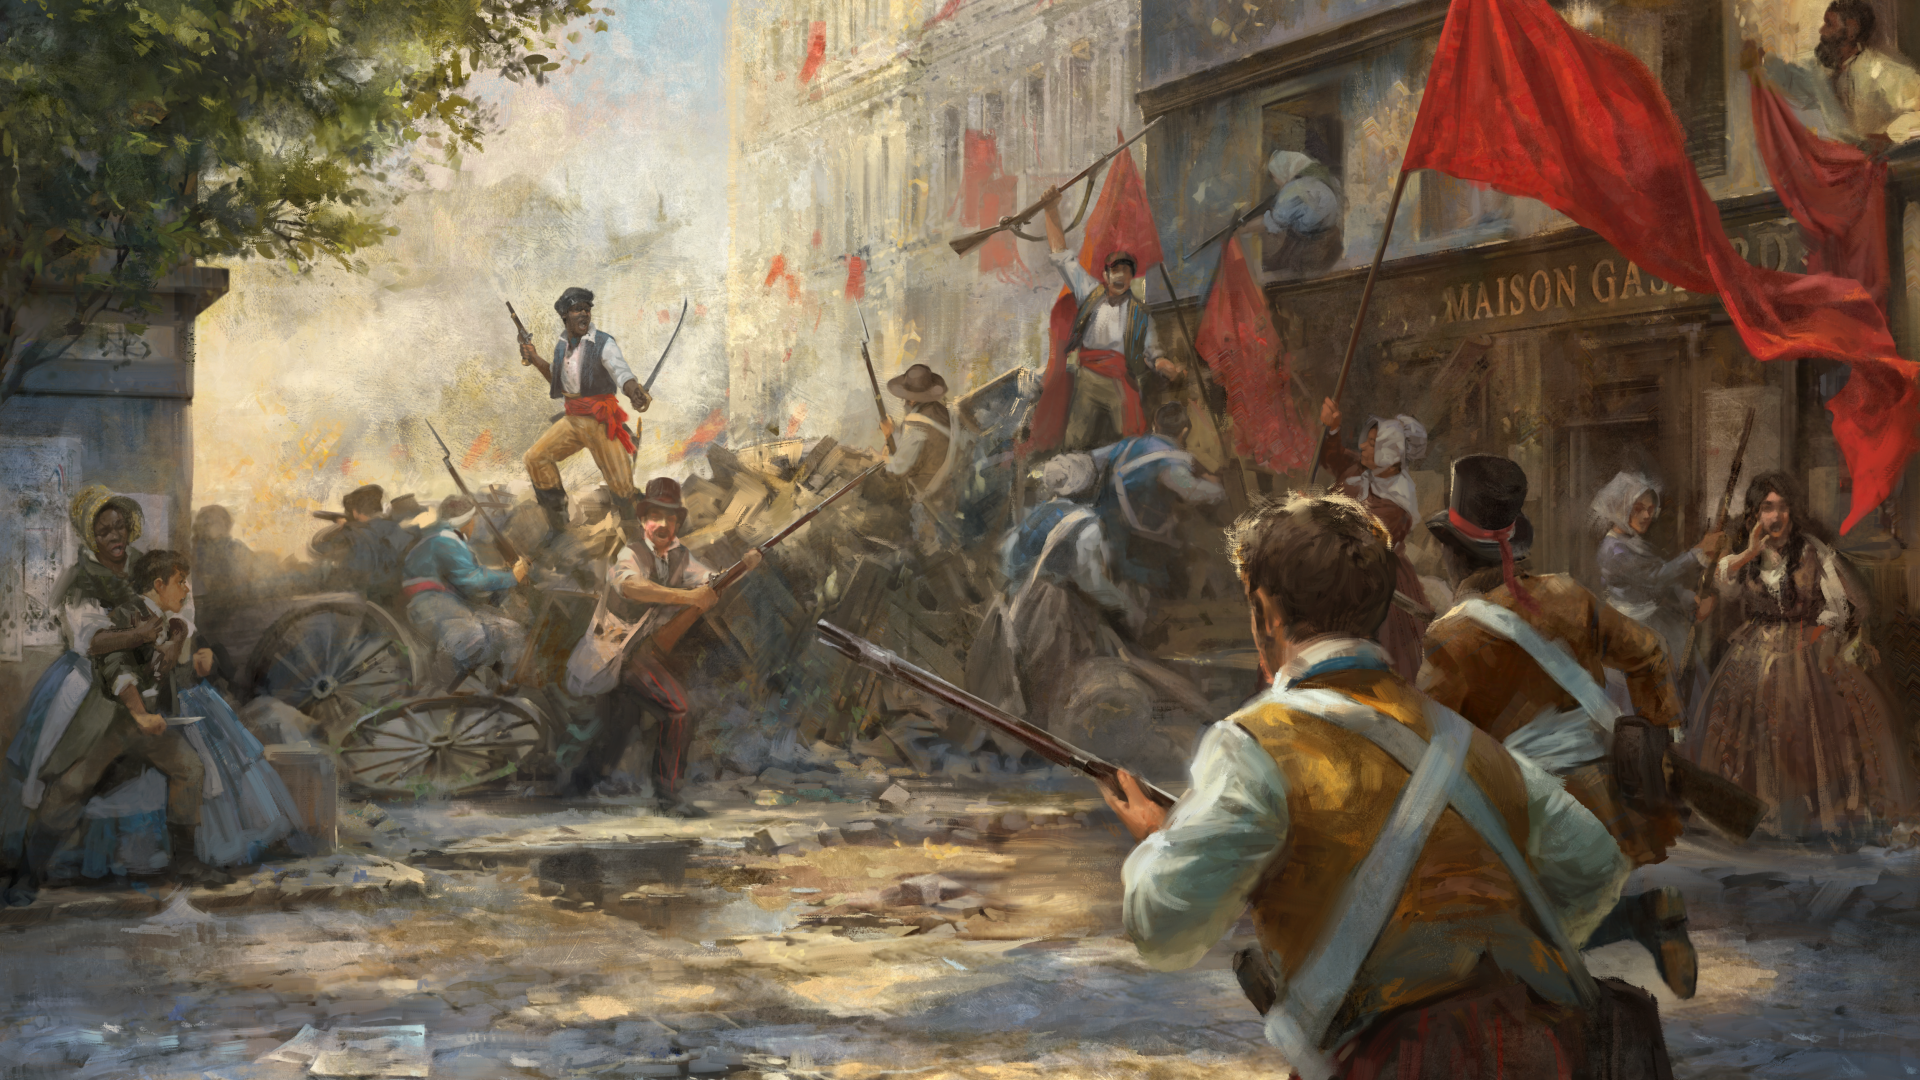 Victoria 3 Official Artwork from Paradox Interactive